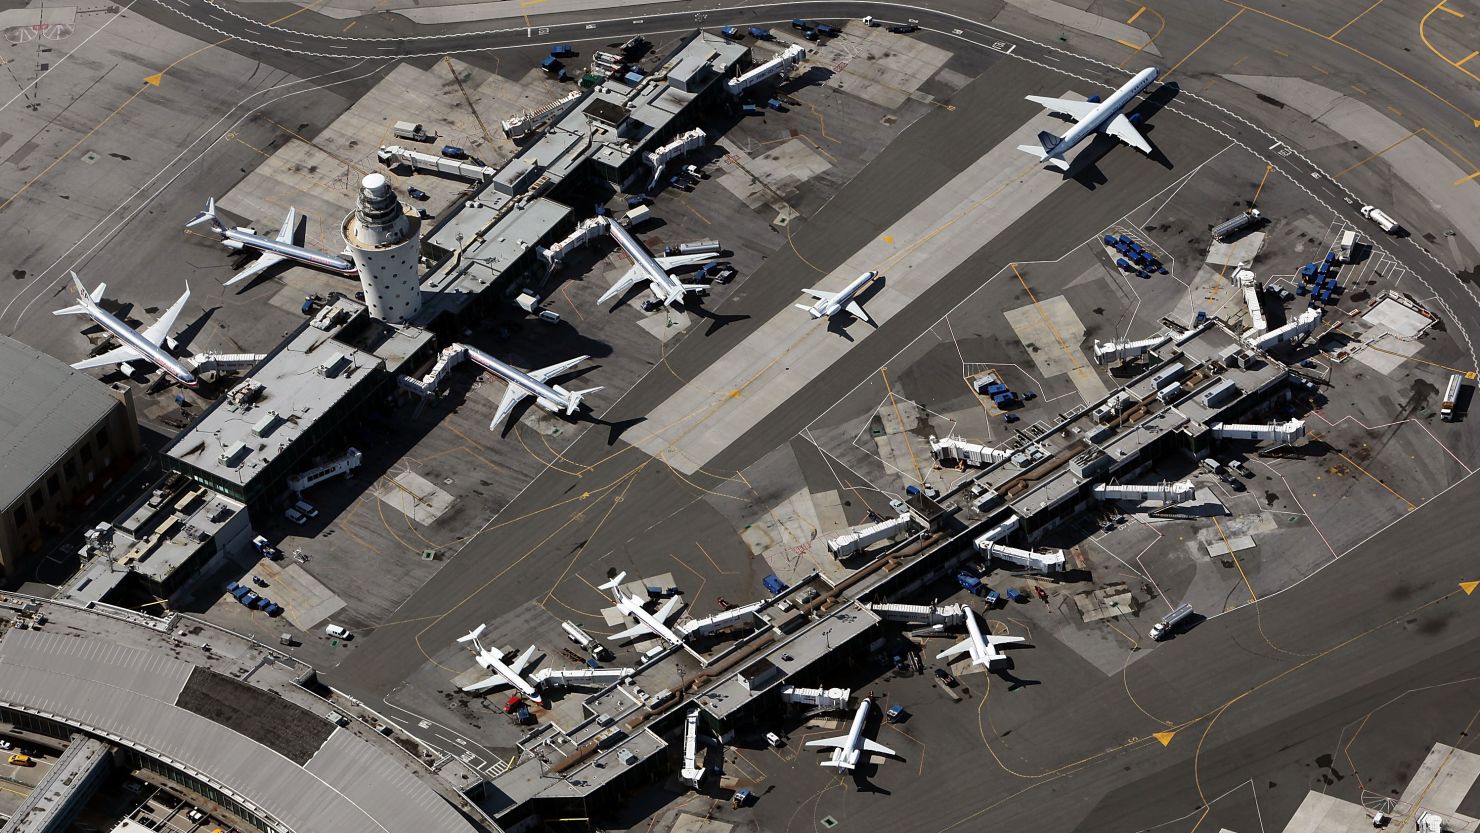 There have been two minor collisions on the ground at La Guardia this week.